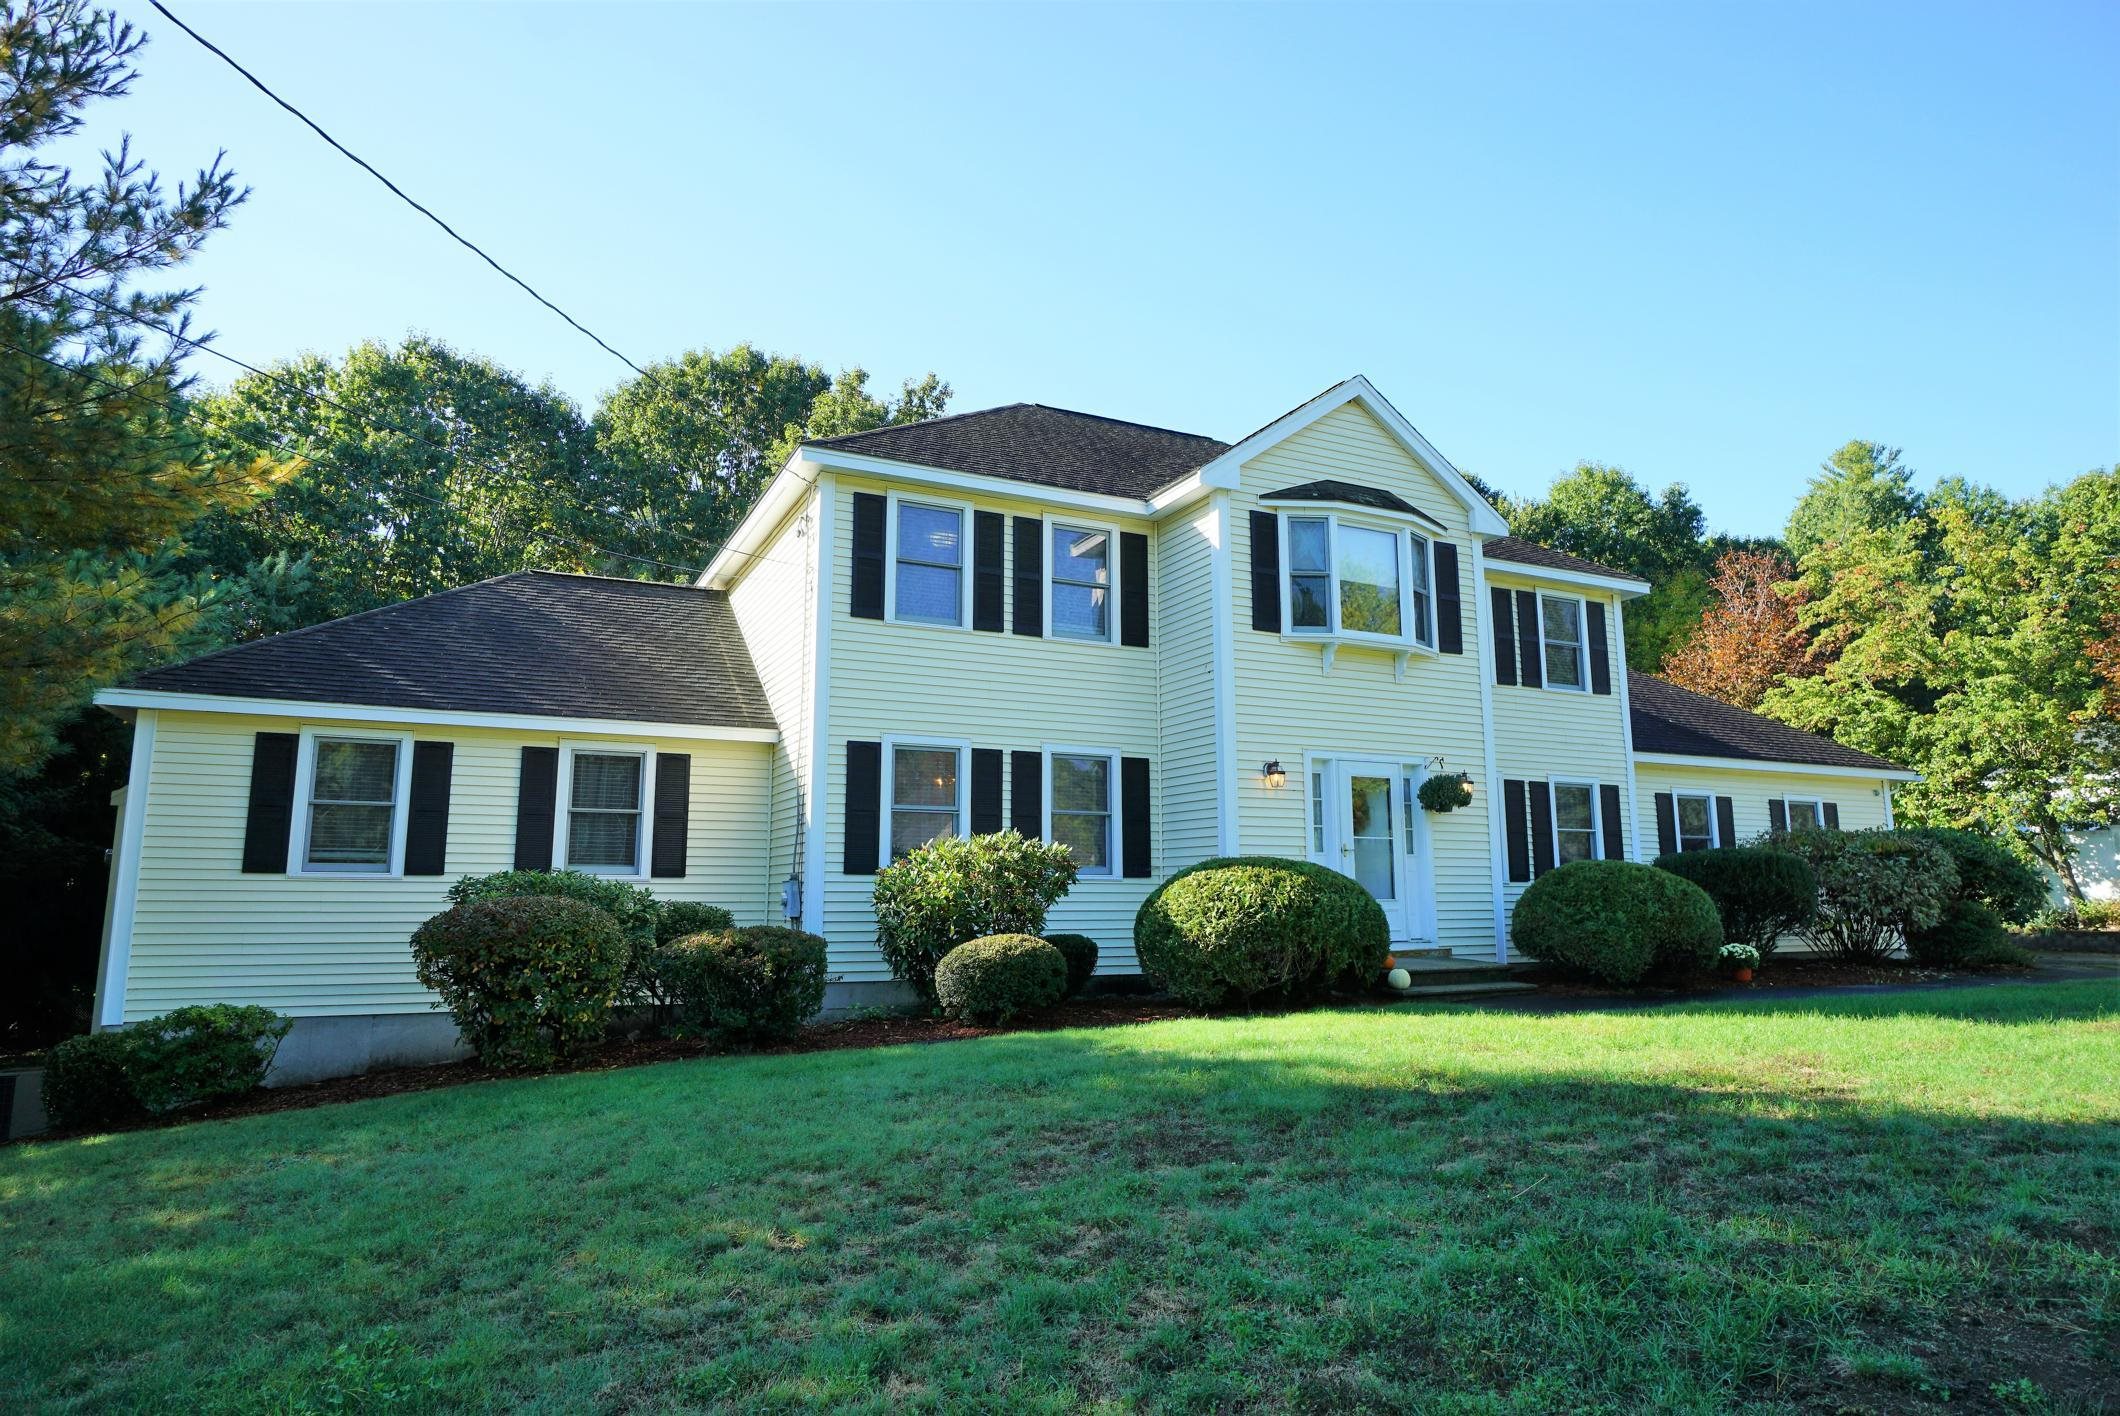 Here is your chance to live in this coveted Nashua neighborhood where nothing has come on the market in over 10 years!  This beautiful colonial sitting on over 2.5 private acres has more than 3,000 sq ft of living space. A three-stall garage with automatic door openers is attached to the home conveniently near the kitchen and first floor half bath.  The kitchen boasts newer fridge, stove and dishwasher. The open area kitchen invites you into the family room with a fireplace for cold winter nights.  Step out onto the oversized deck and view your private back yard where the wooded area connects to acres of conservation land on the MA boarder.  Head upstairs to three large bedroom and a full bath, along with a primary suite with high ceilings, a full bath that included a hot tub for relaxing, and extra “His and Hers” closet space for all your storage needs.   An extra room just off of the primary bedroom can be used as an office or as a hobby room.  Need even more room?  The walkout basement with high ceilings and windows is waiting for your ideas to be a great new living area-a man’s cave or even an in-law apartment?  Whatever suits your needs!  Irrigation, central air, security. This home has it all.